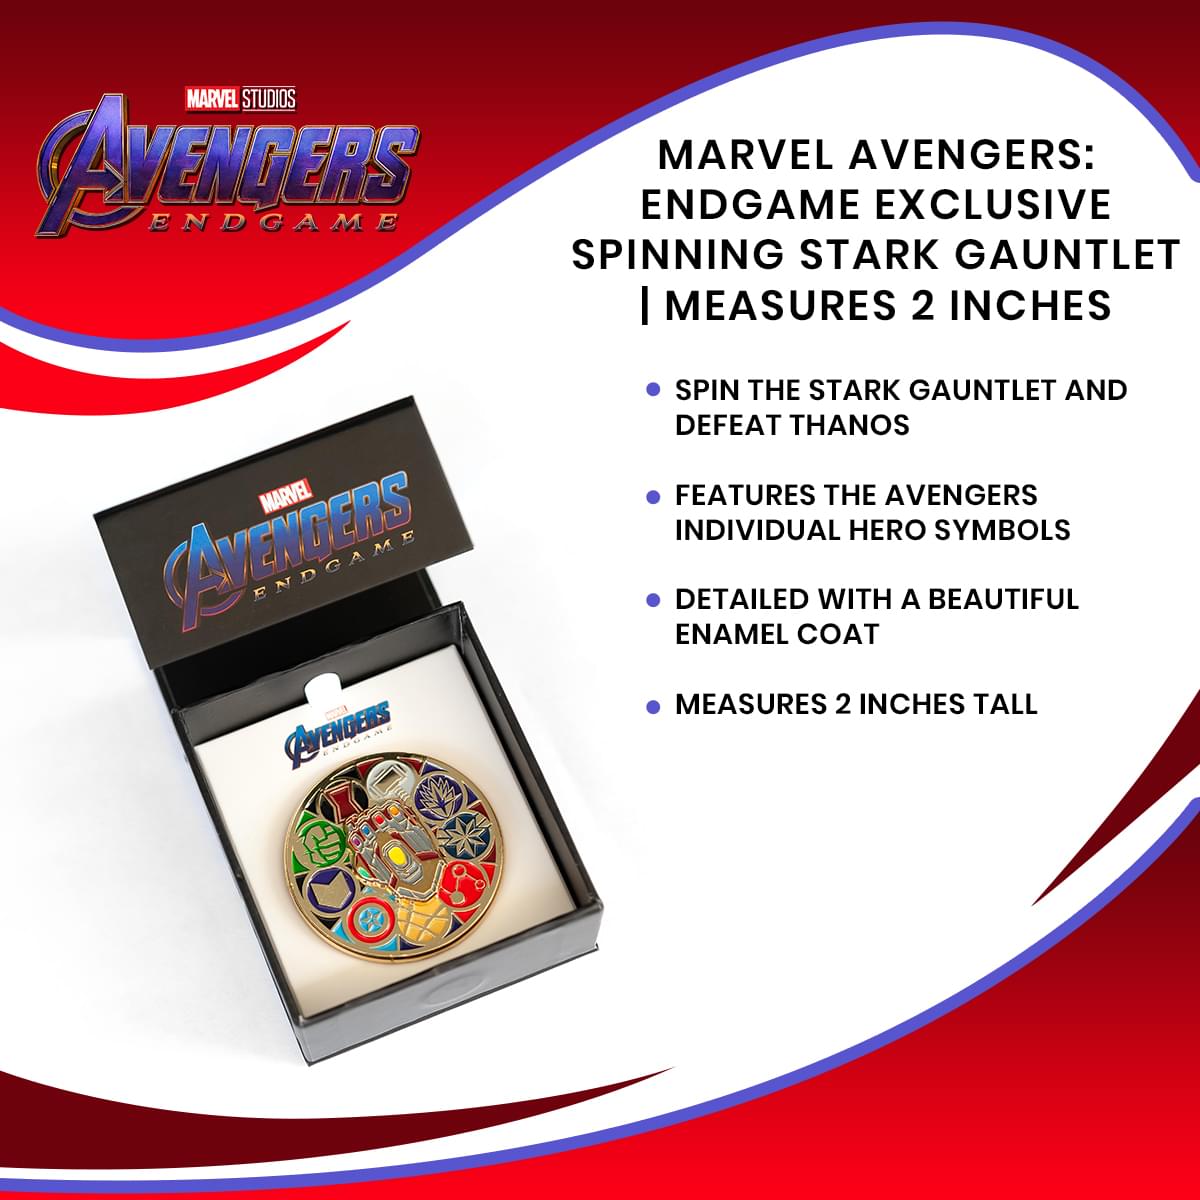 Marvel Avengers: Endgame Exclusive Spinning Stark Gauntlet | Measures 2 Inches